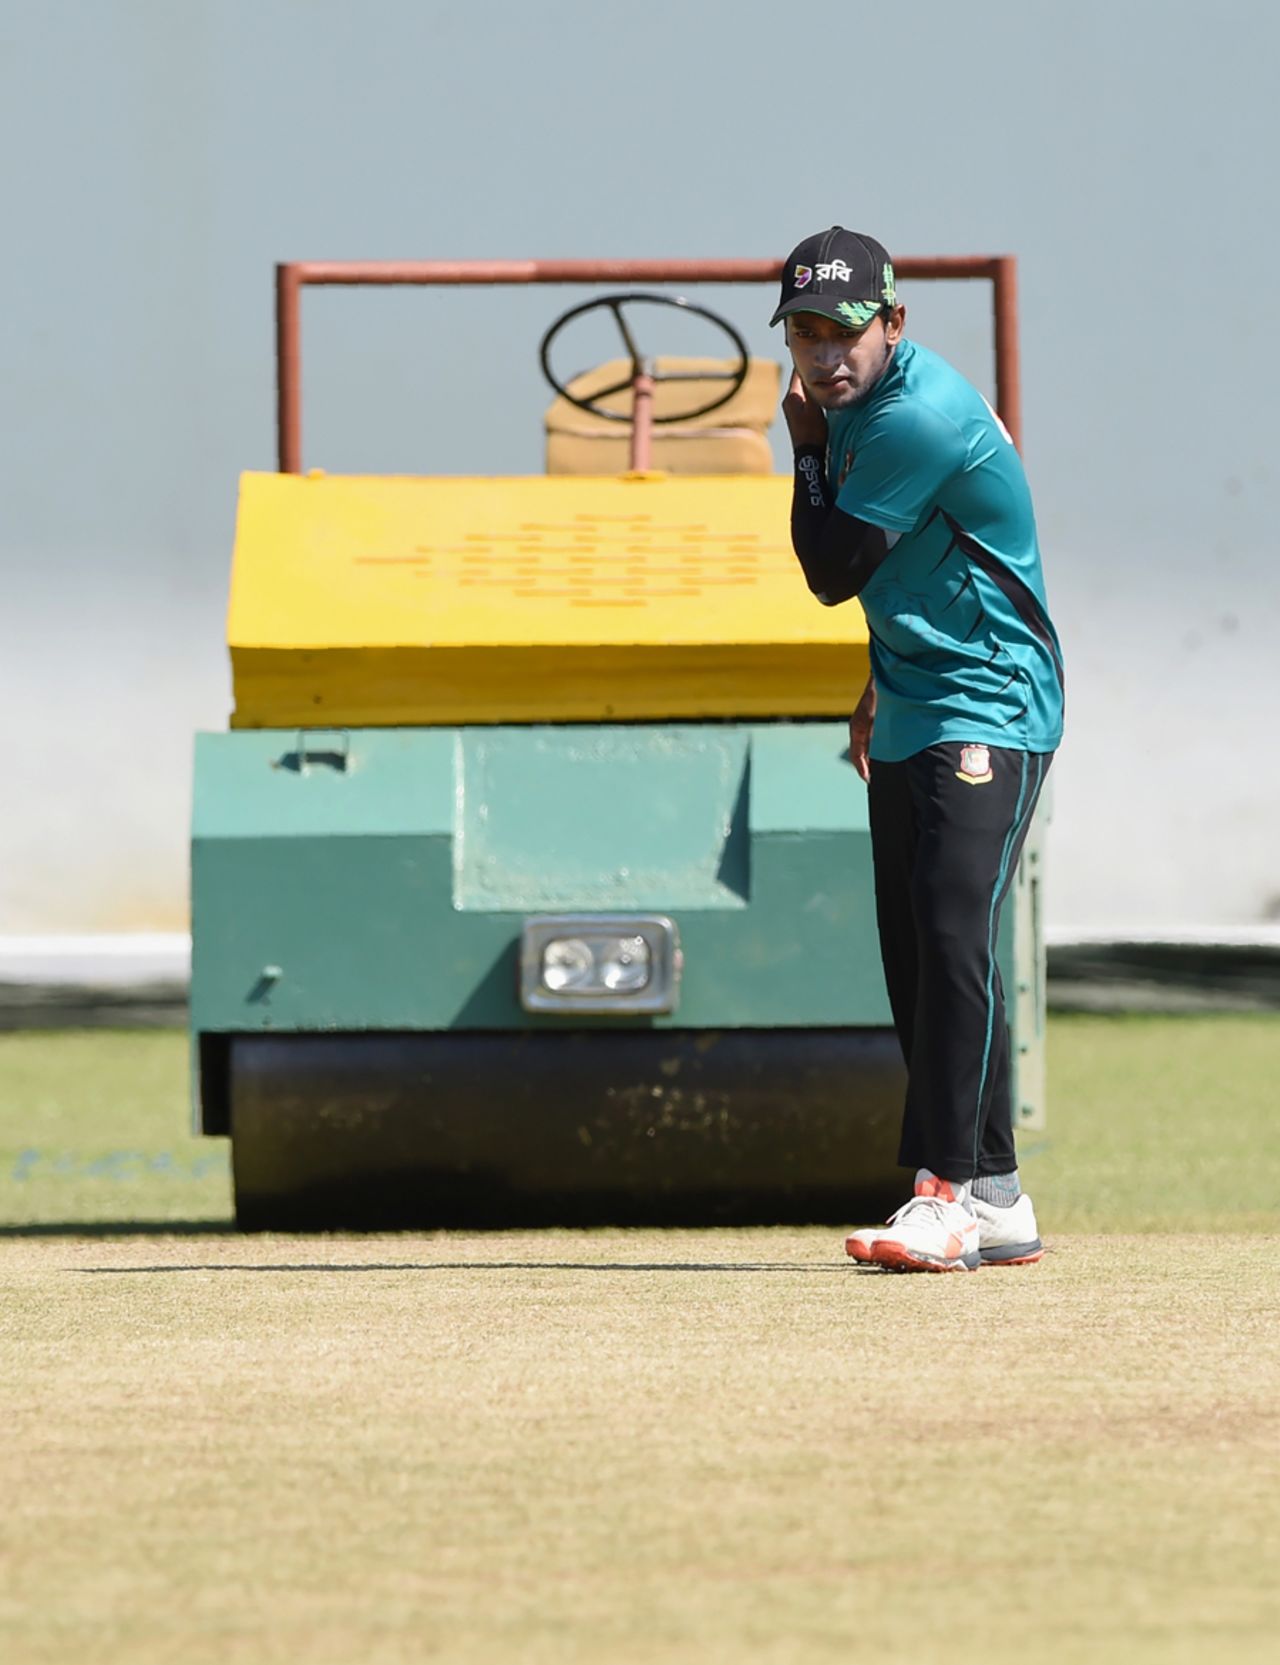 Mushfiqur Rahim indulges in shadow practice on the pitch, Colombo, March 13, 2017